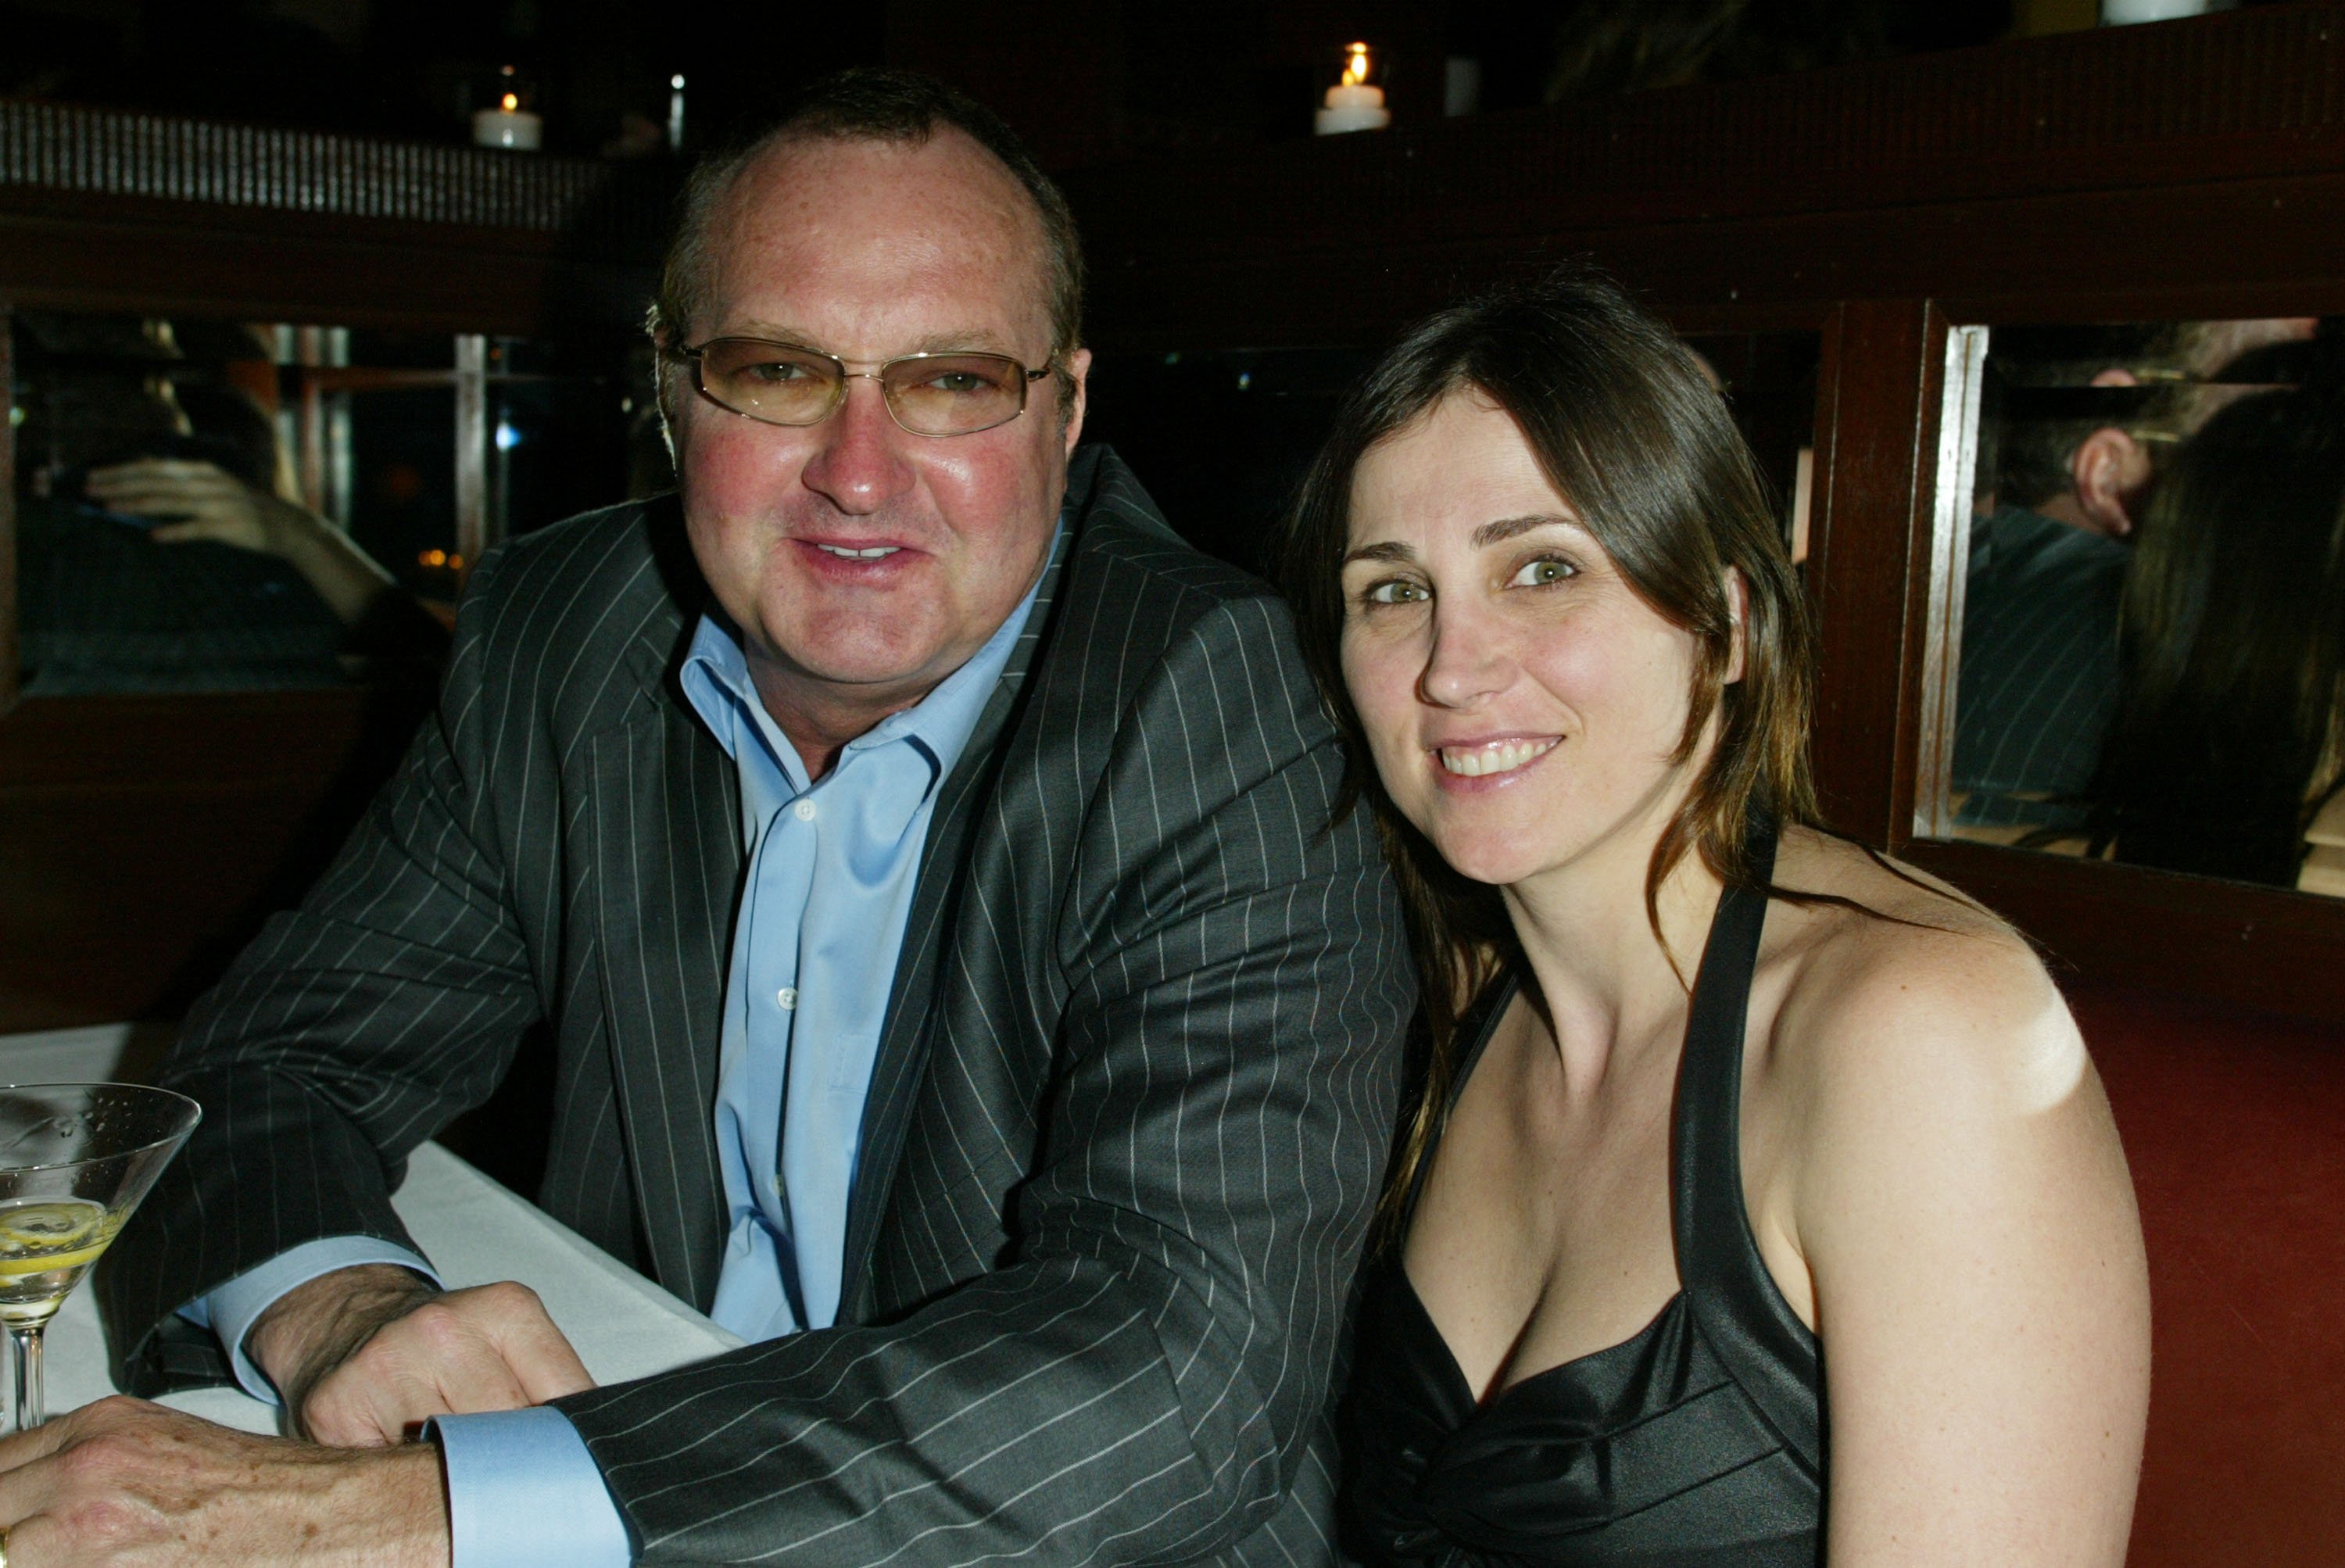 Randy Quaid and Evi Quaid at Linda Wells Allure Dinner 2004 at The Buffalo Club in Santa Monica, California, United States. | Source: Getty Images